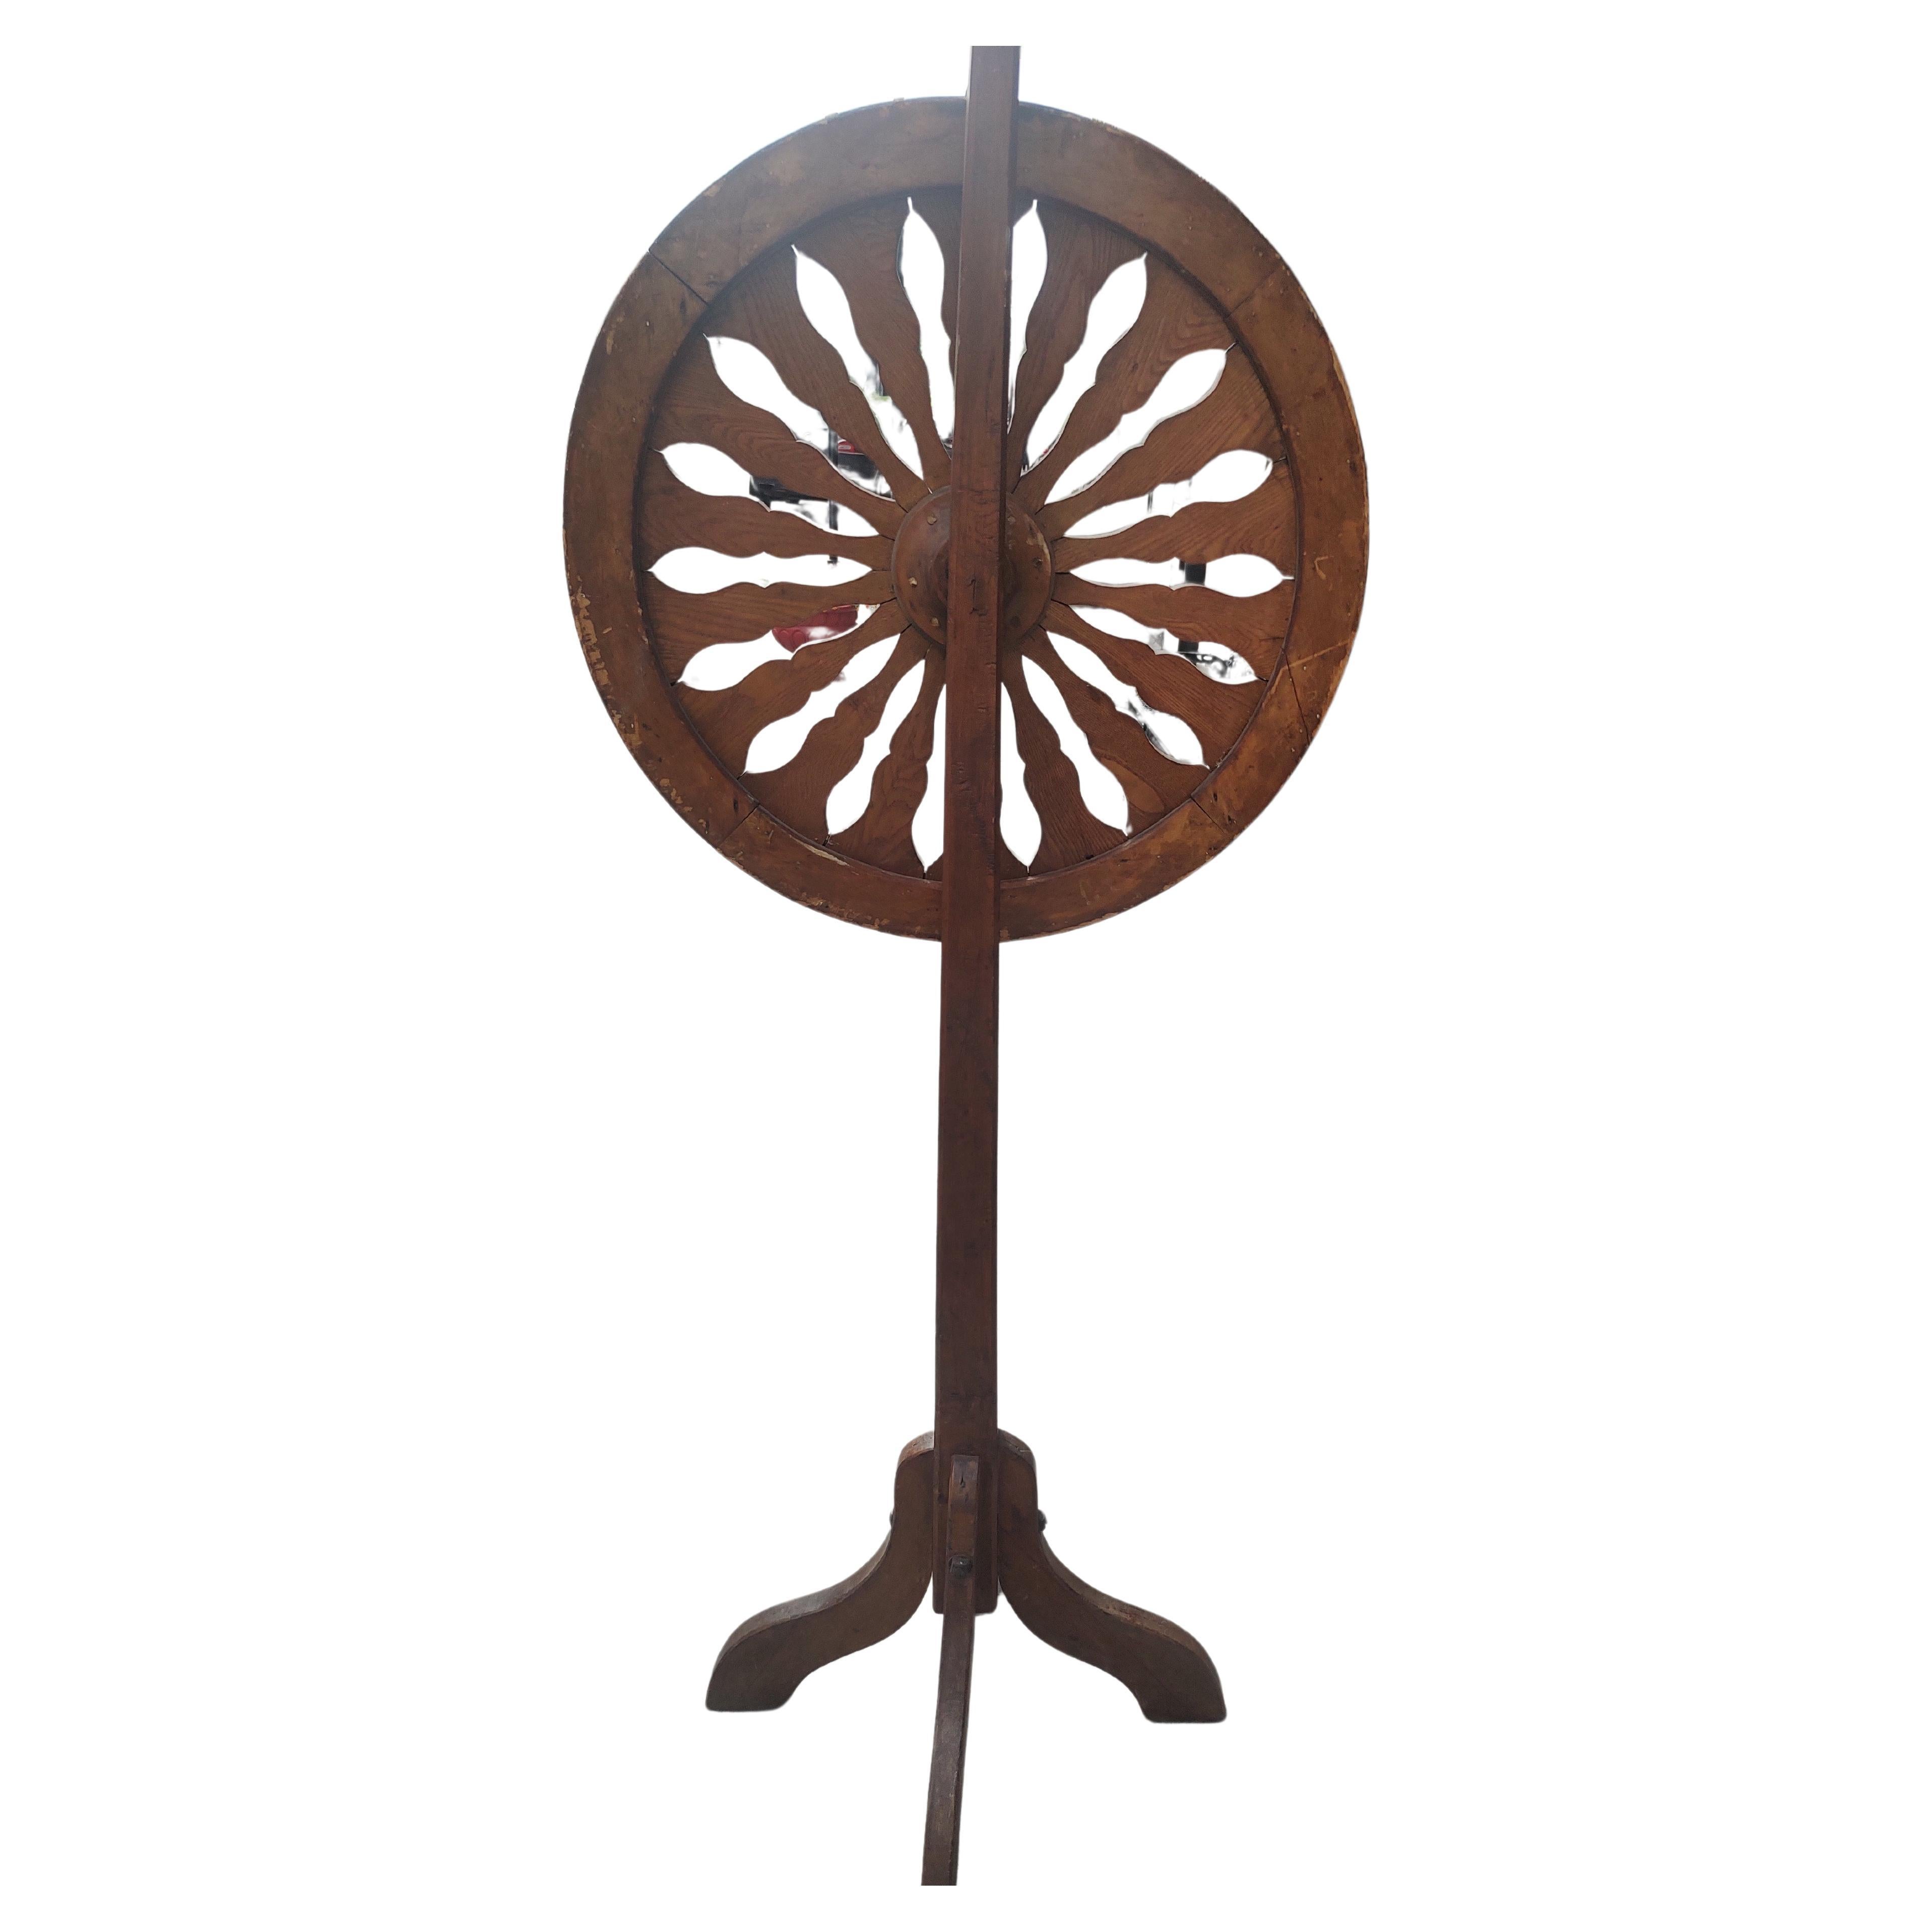 Fun and fabulous Folk Art Carnival Spinning Wheel from the latter part of the 19th century. Totally original and in fantastic condition. Nice old Ted and black paint looks to be correct. Leather ticker and all the nails in place. Disassembles for